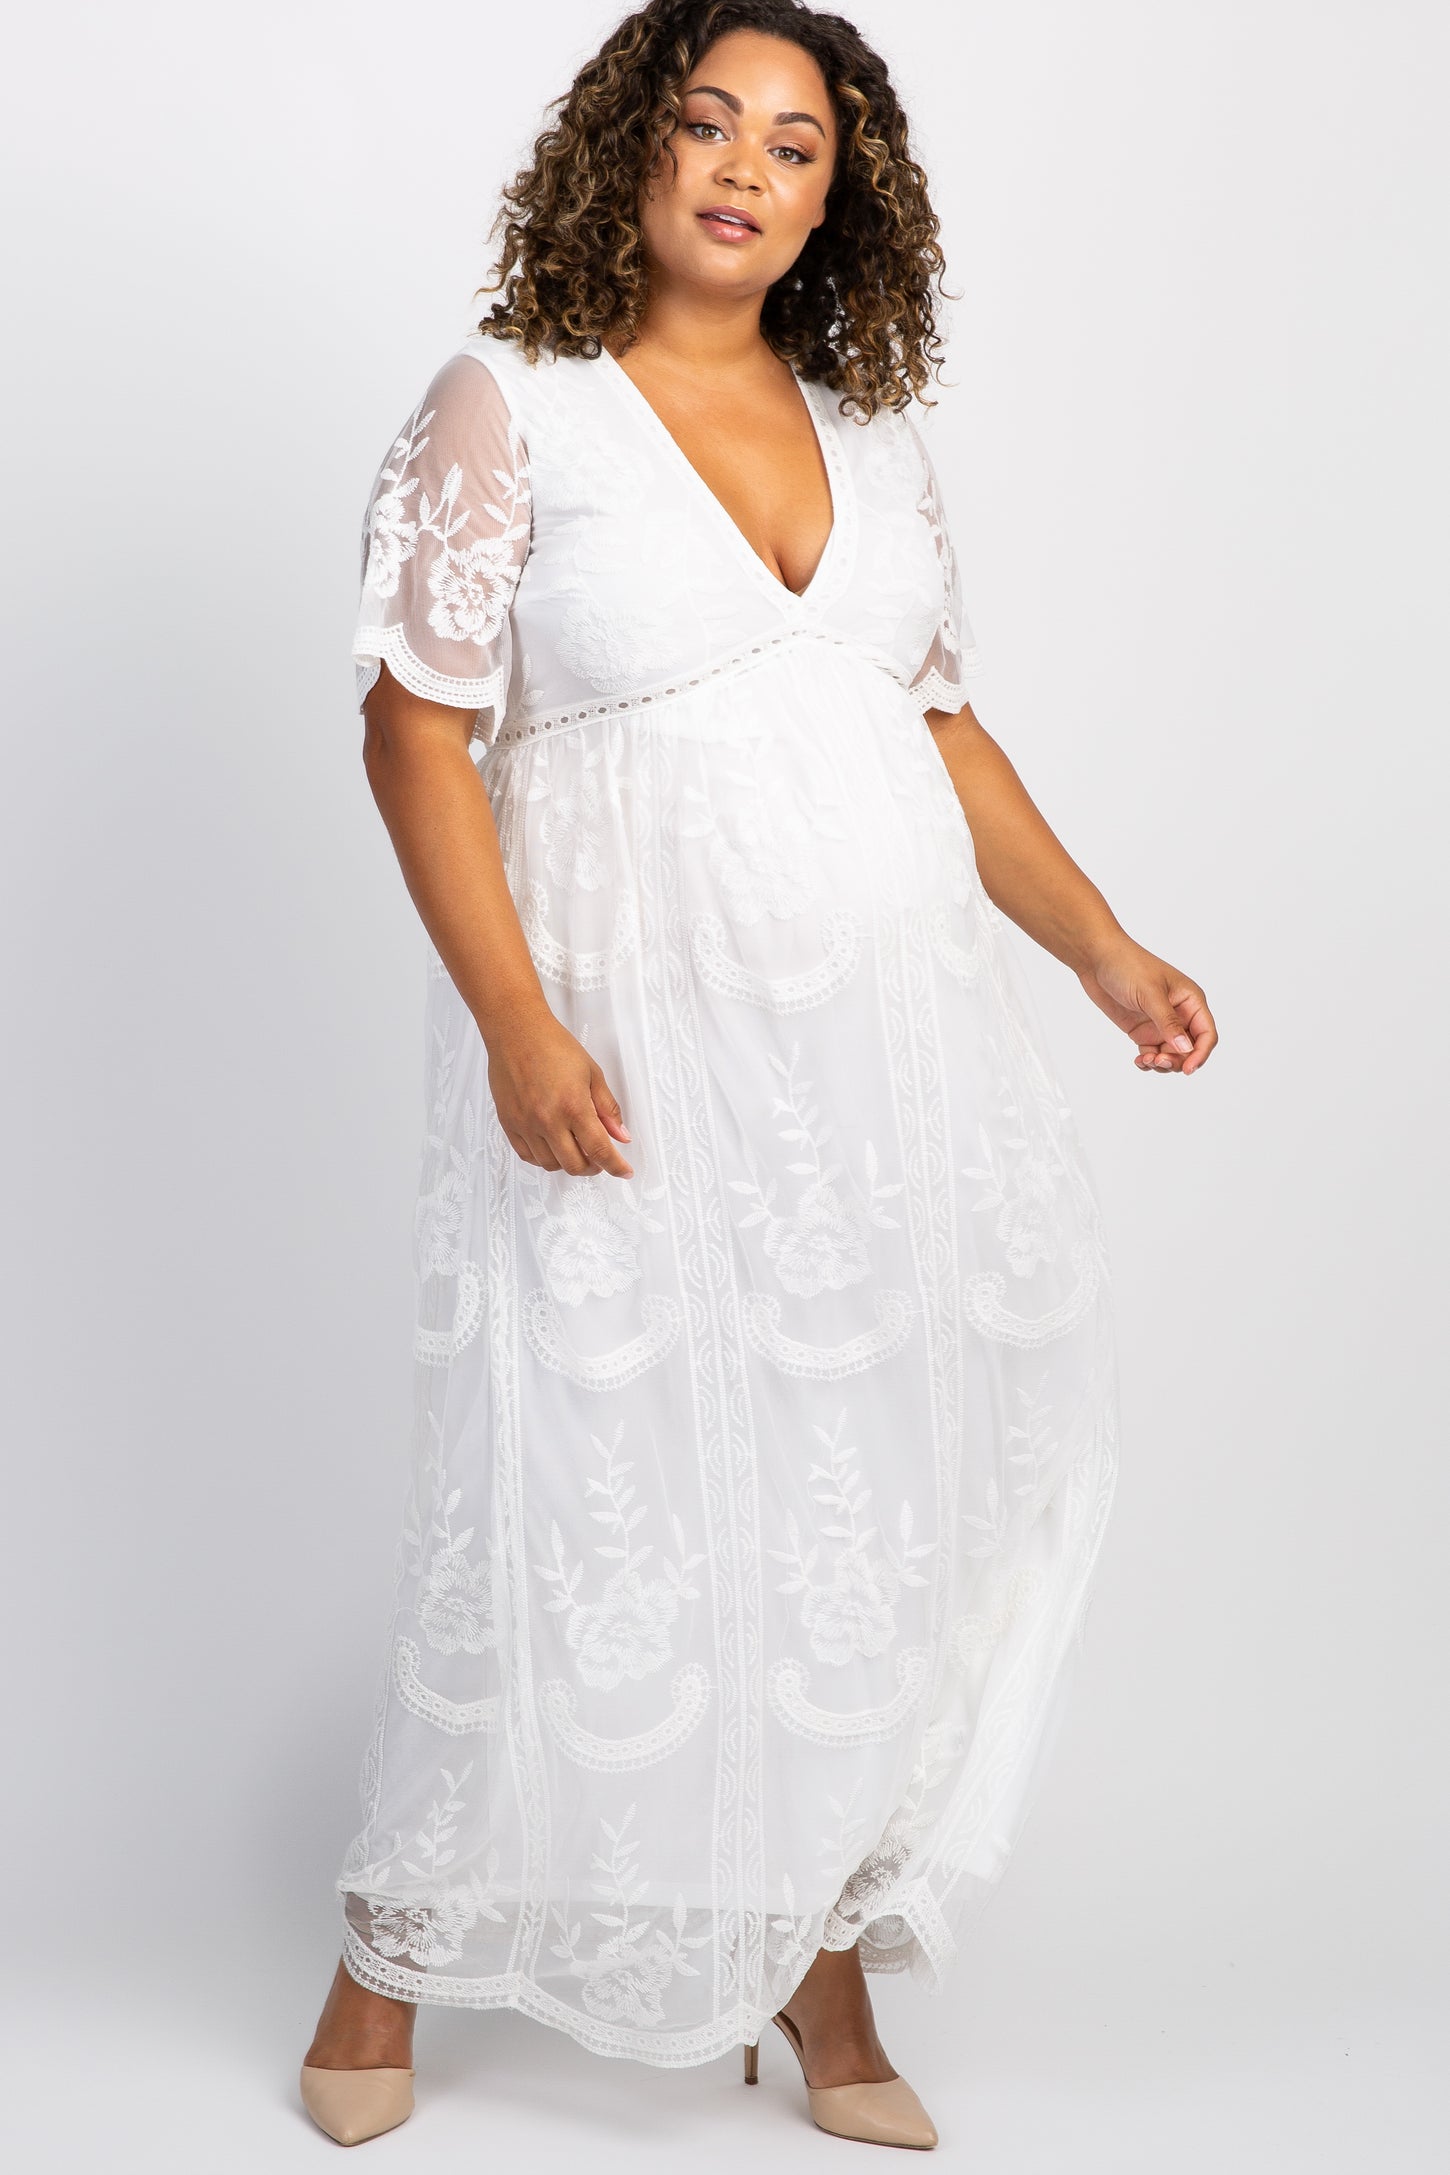 Plus Size Maternity Clothes Ultimate Guide [2024]  Plus size pregnancy,  Plus size maternity dresses, Plus size fall fashion